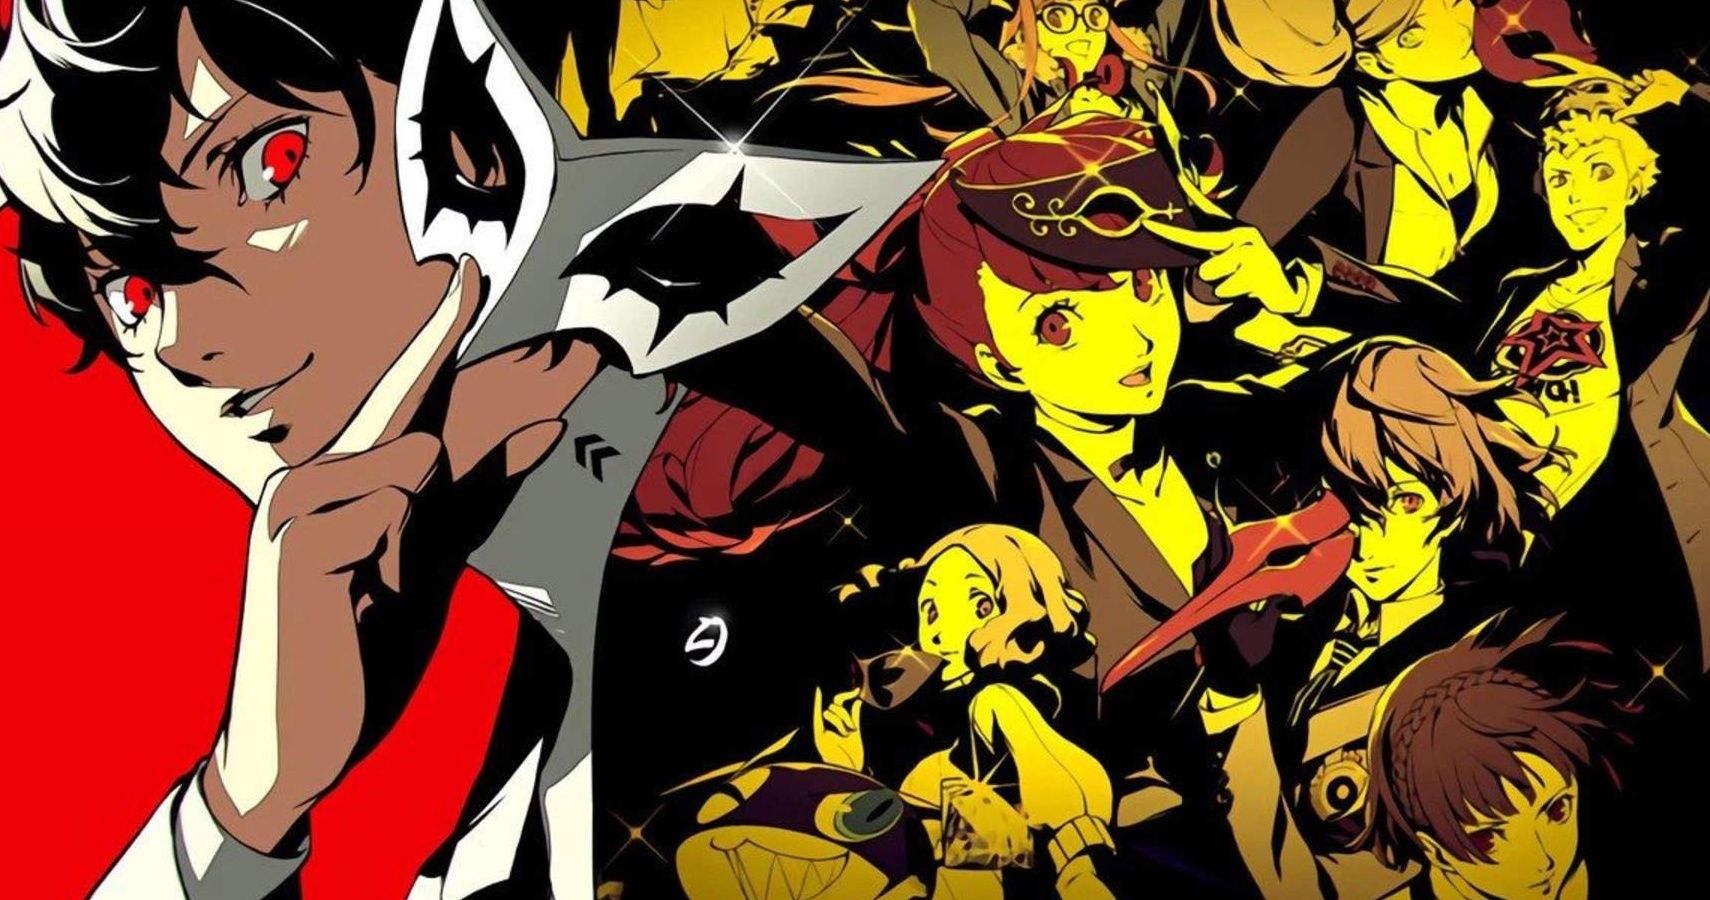 Persona 5: 10 Video Game Characters That Should Be On The Phantom Thieves